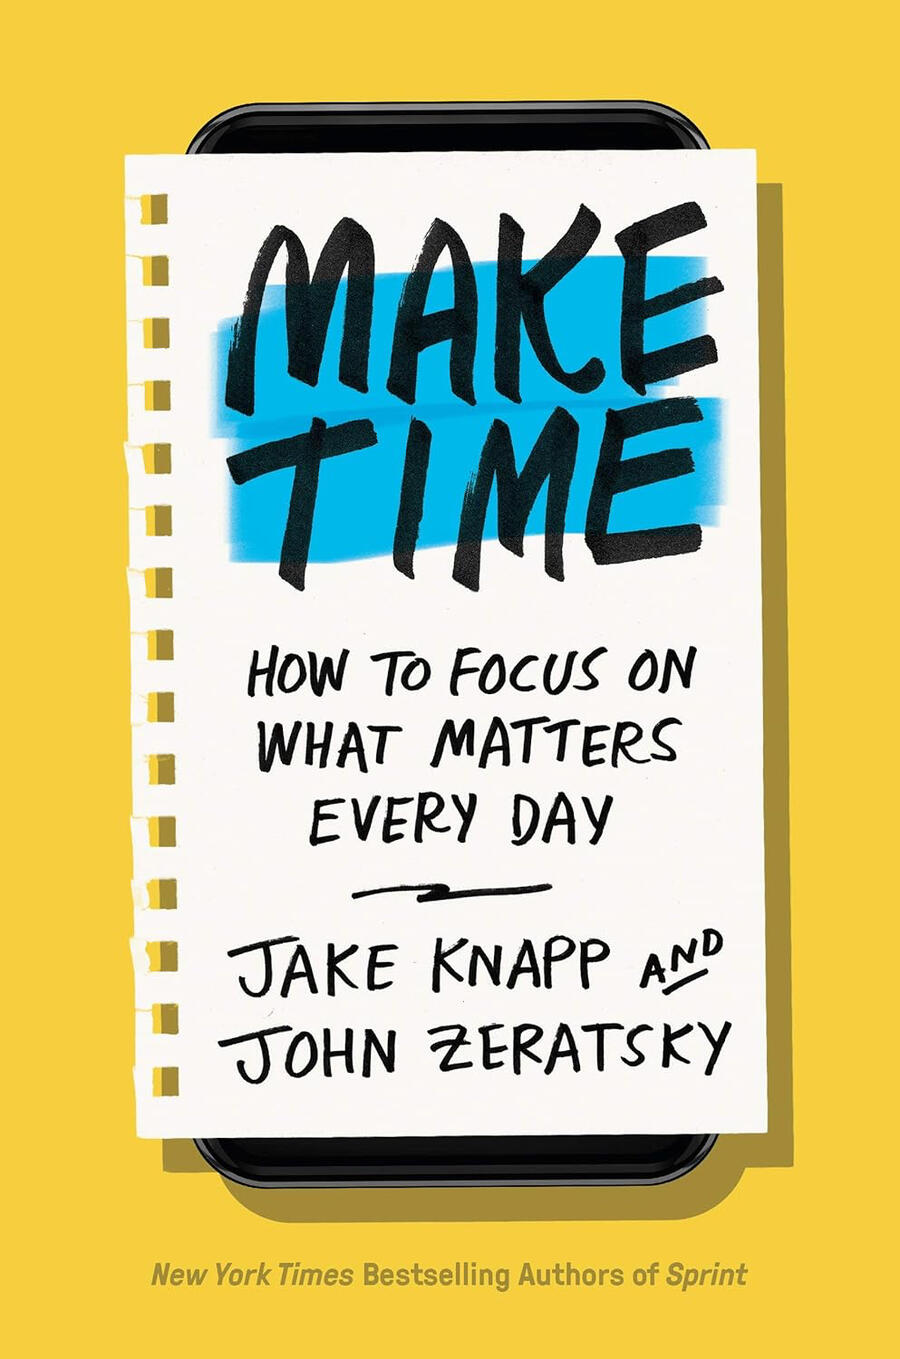 Make Time - How To Focus On What Matter Every Day by Jake Knapp and John Zeratsky